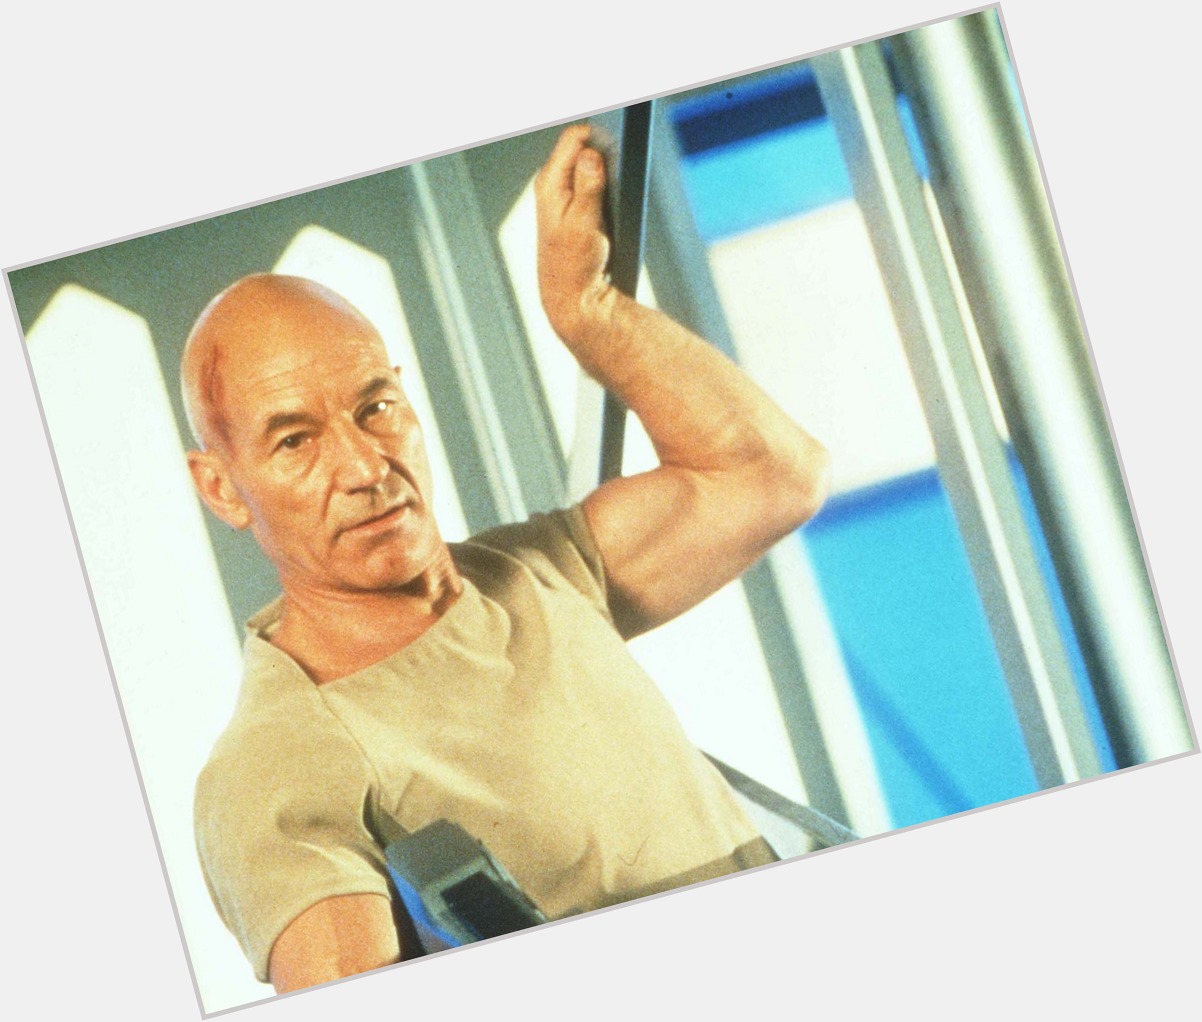 Captain Jean Luc Picard Athletic body,  bald hair & hairstyles